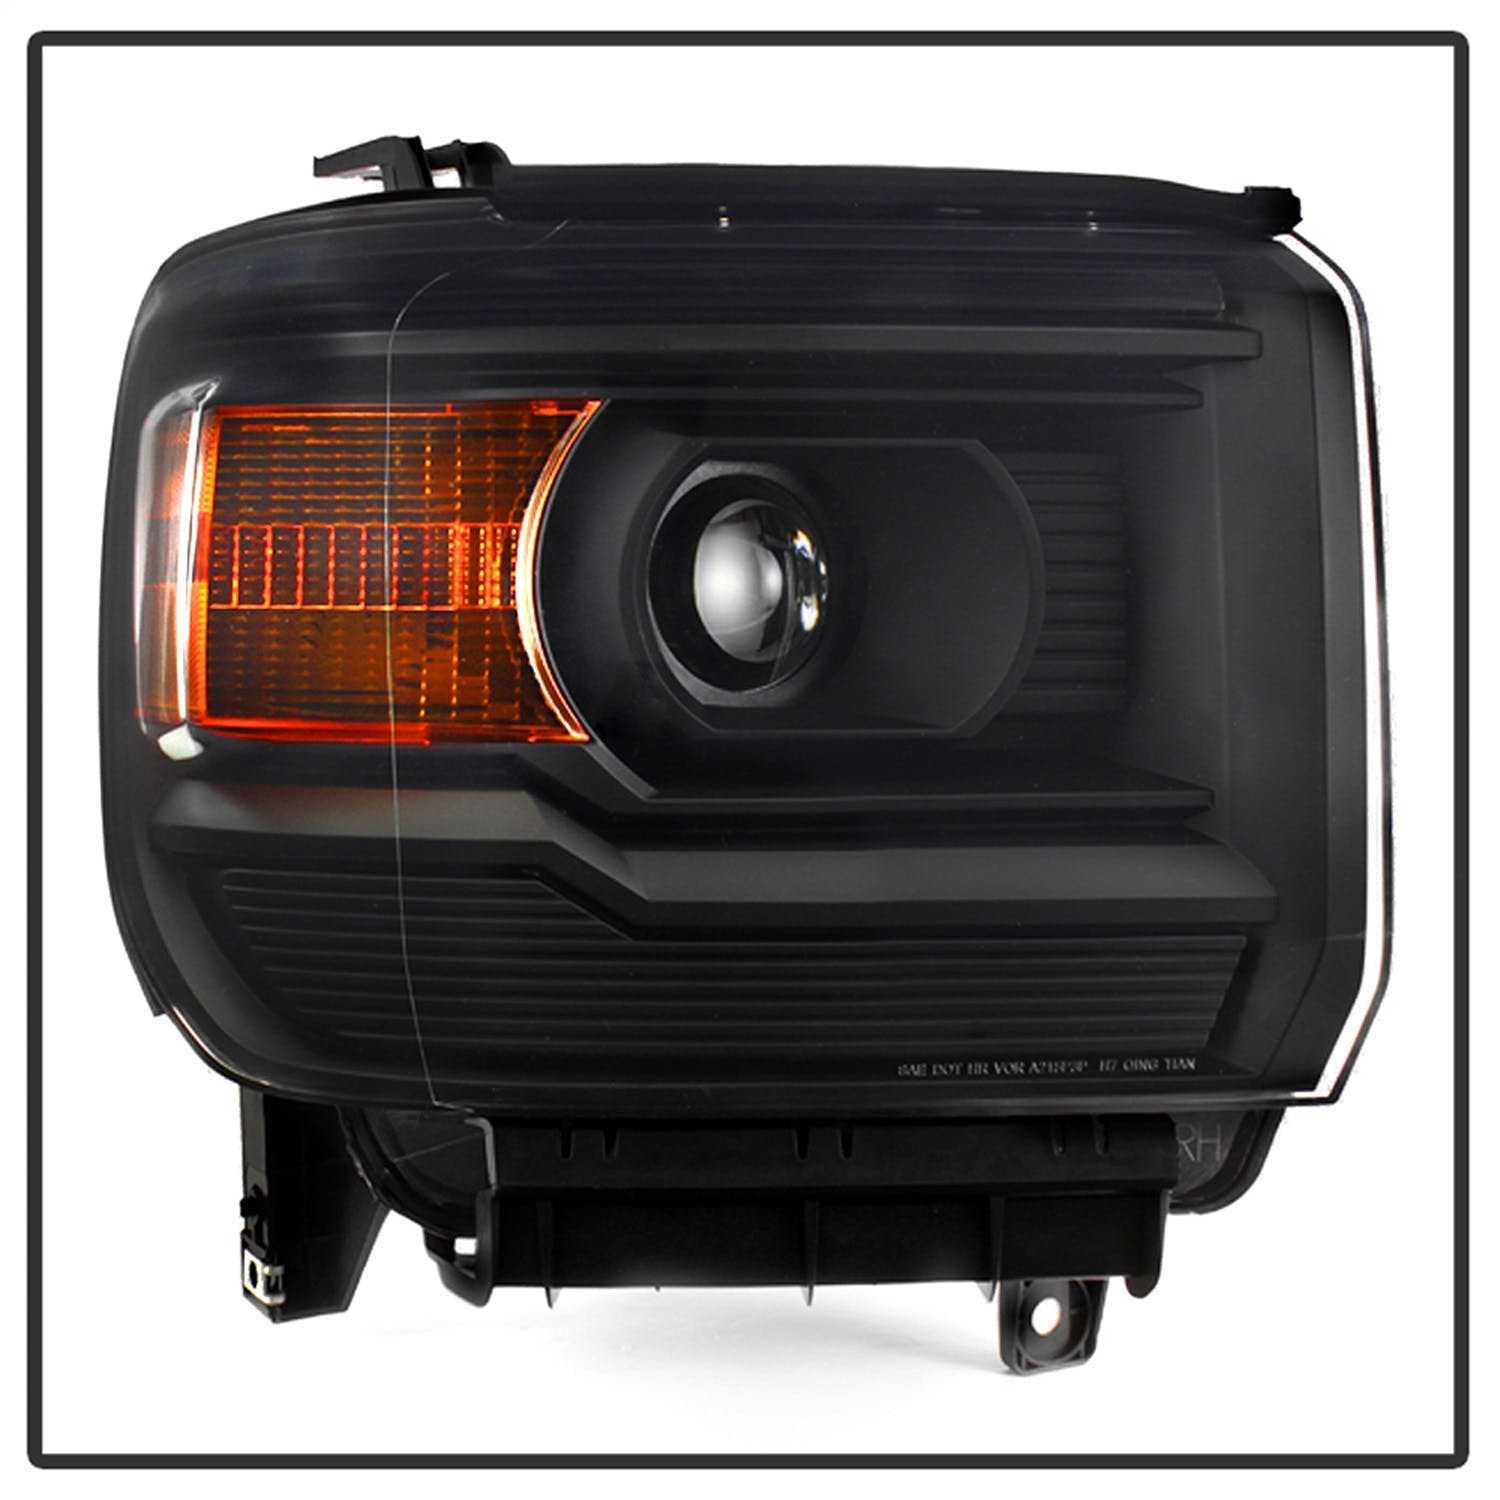 XTUNE POWER 9042423 GMC Sierra 1500 14 15 Sierra 2500HD 3500HD 2015 2019 Halogen Models ( Does Not Fit Factory HID Models ) OEM Style Headlights Low Beam H7(Included) ; High Beam H7(Included) ; Signal 7443(Not Included) Black